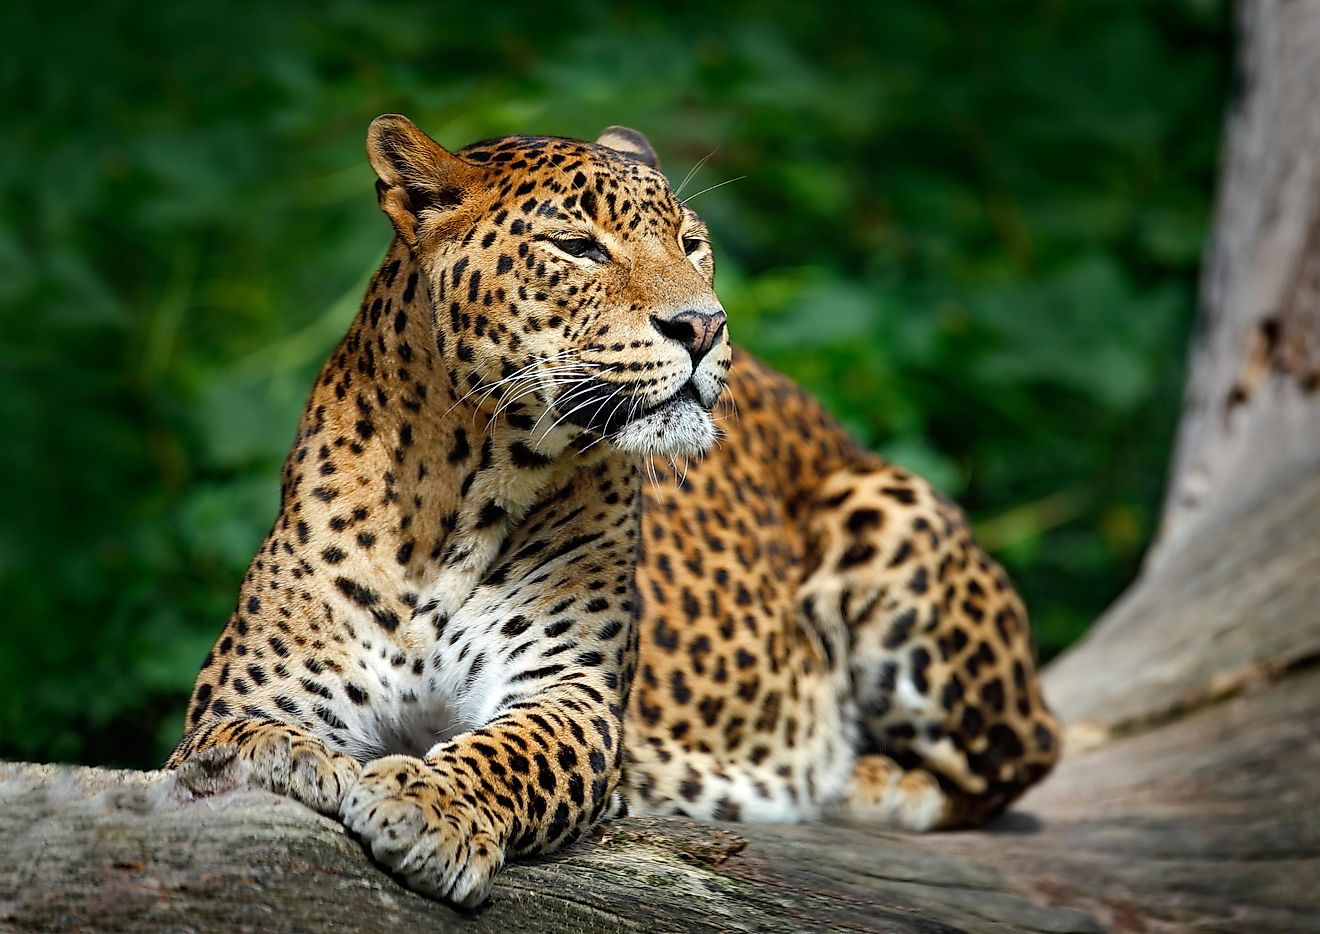 One of the most excellent examples of disruptive coloration can be seen on leopards.